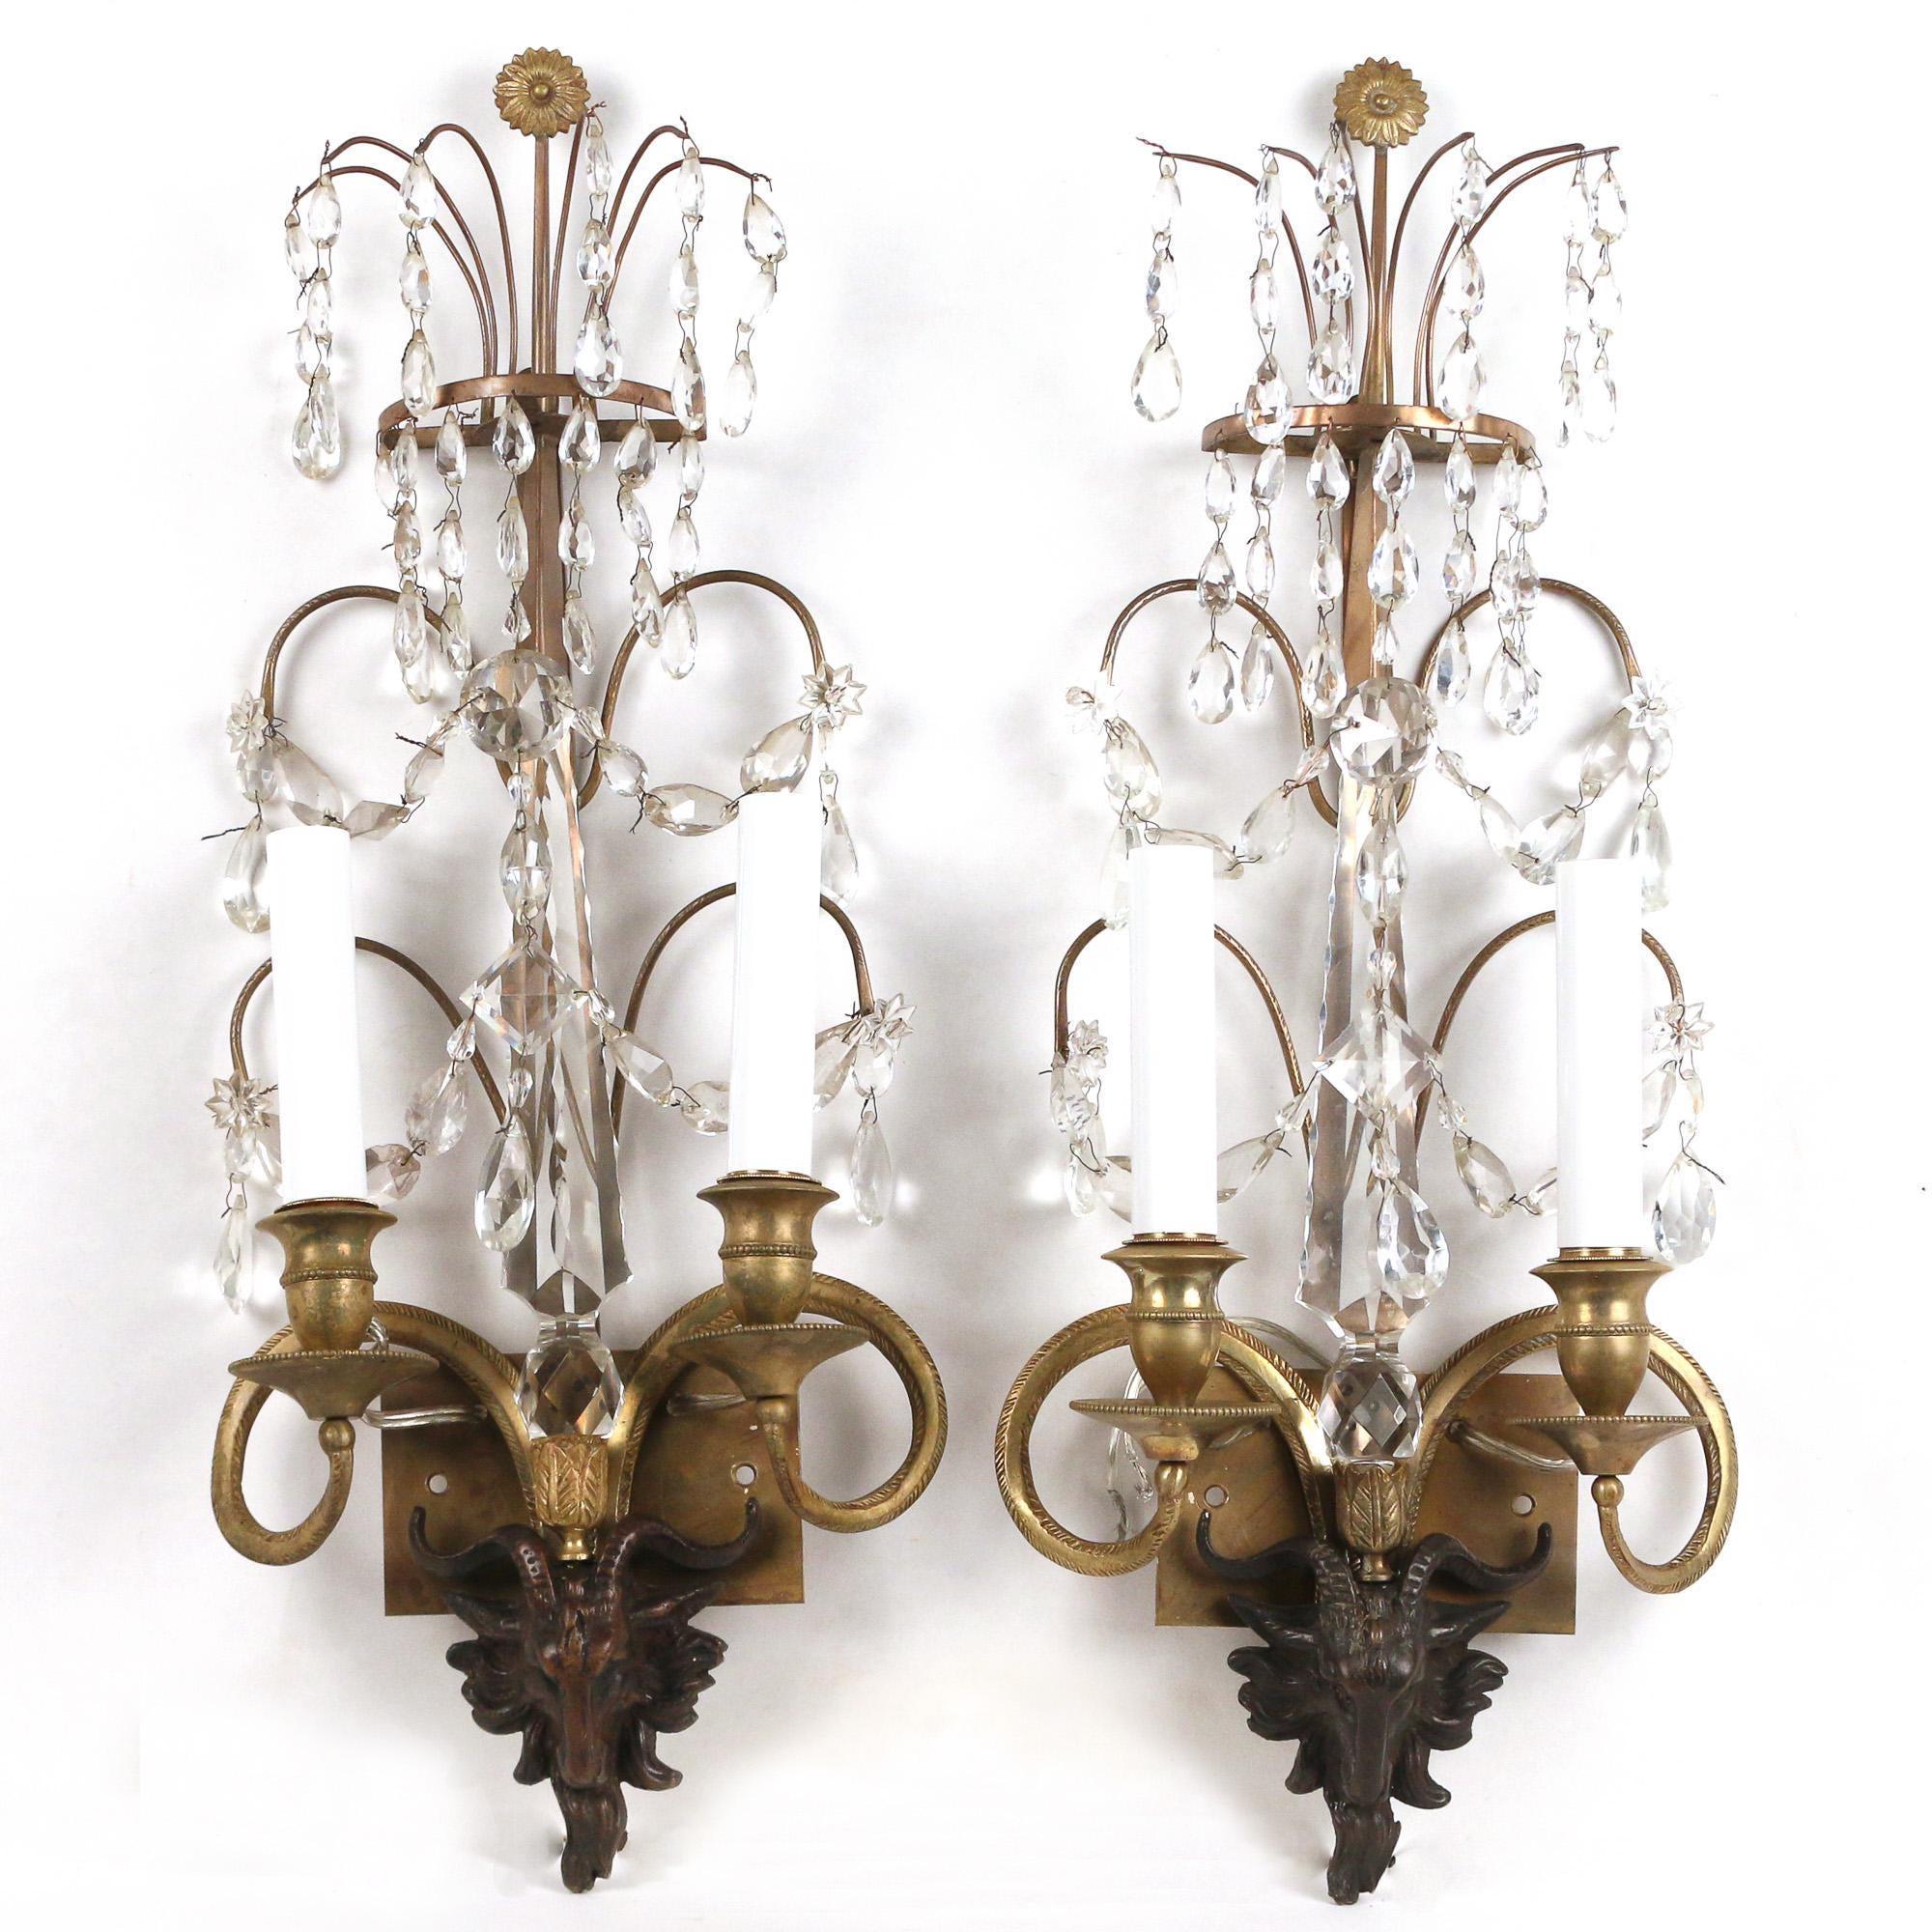 Fine pair of early 19th century patinated and gilt bronze and crystal wall lights, having flower head finial over a series of branches with drops and two tiers of swag draped arms, having a single cut spier over chocolate brown patinated goat's head